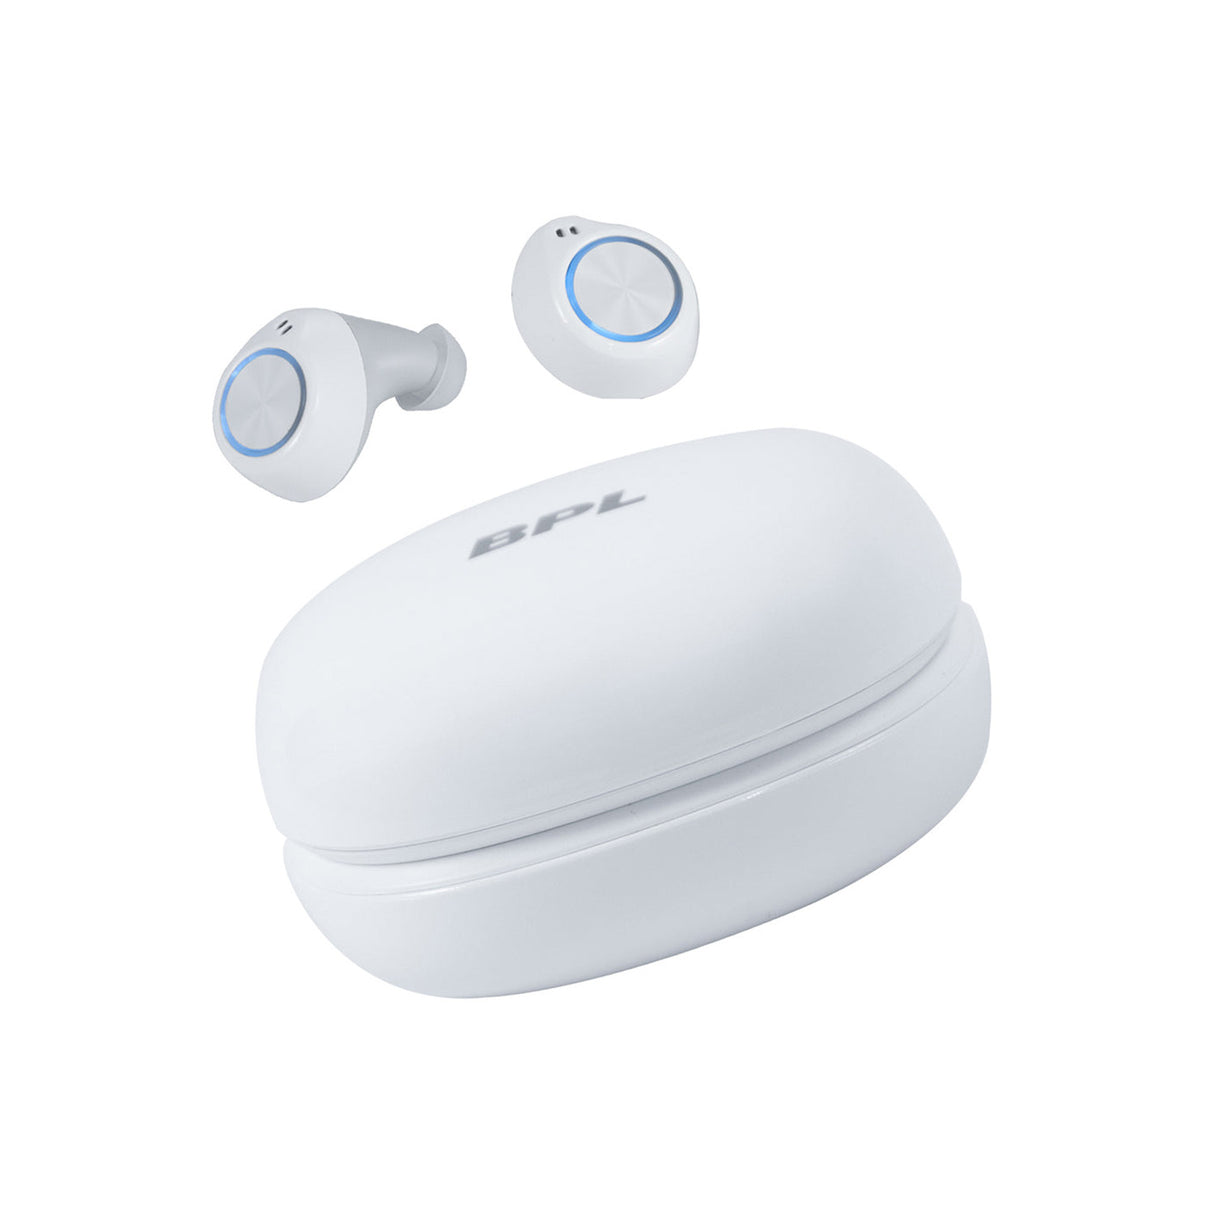 Immerse in audio luxury with BPL Ear Buddy – White perfection, 18 hours of joy.